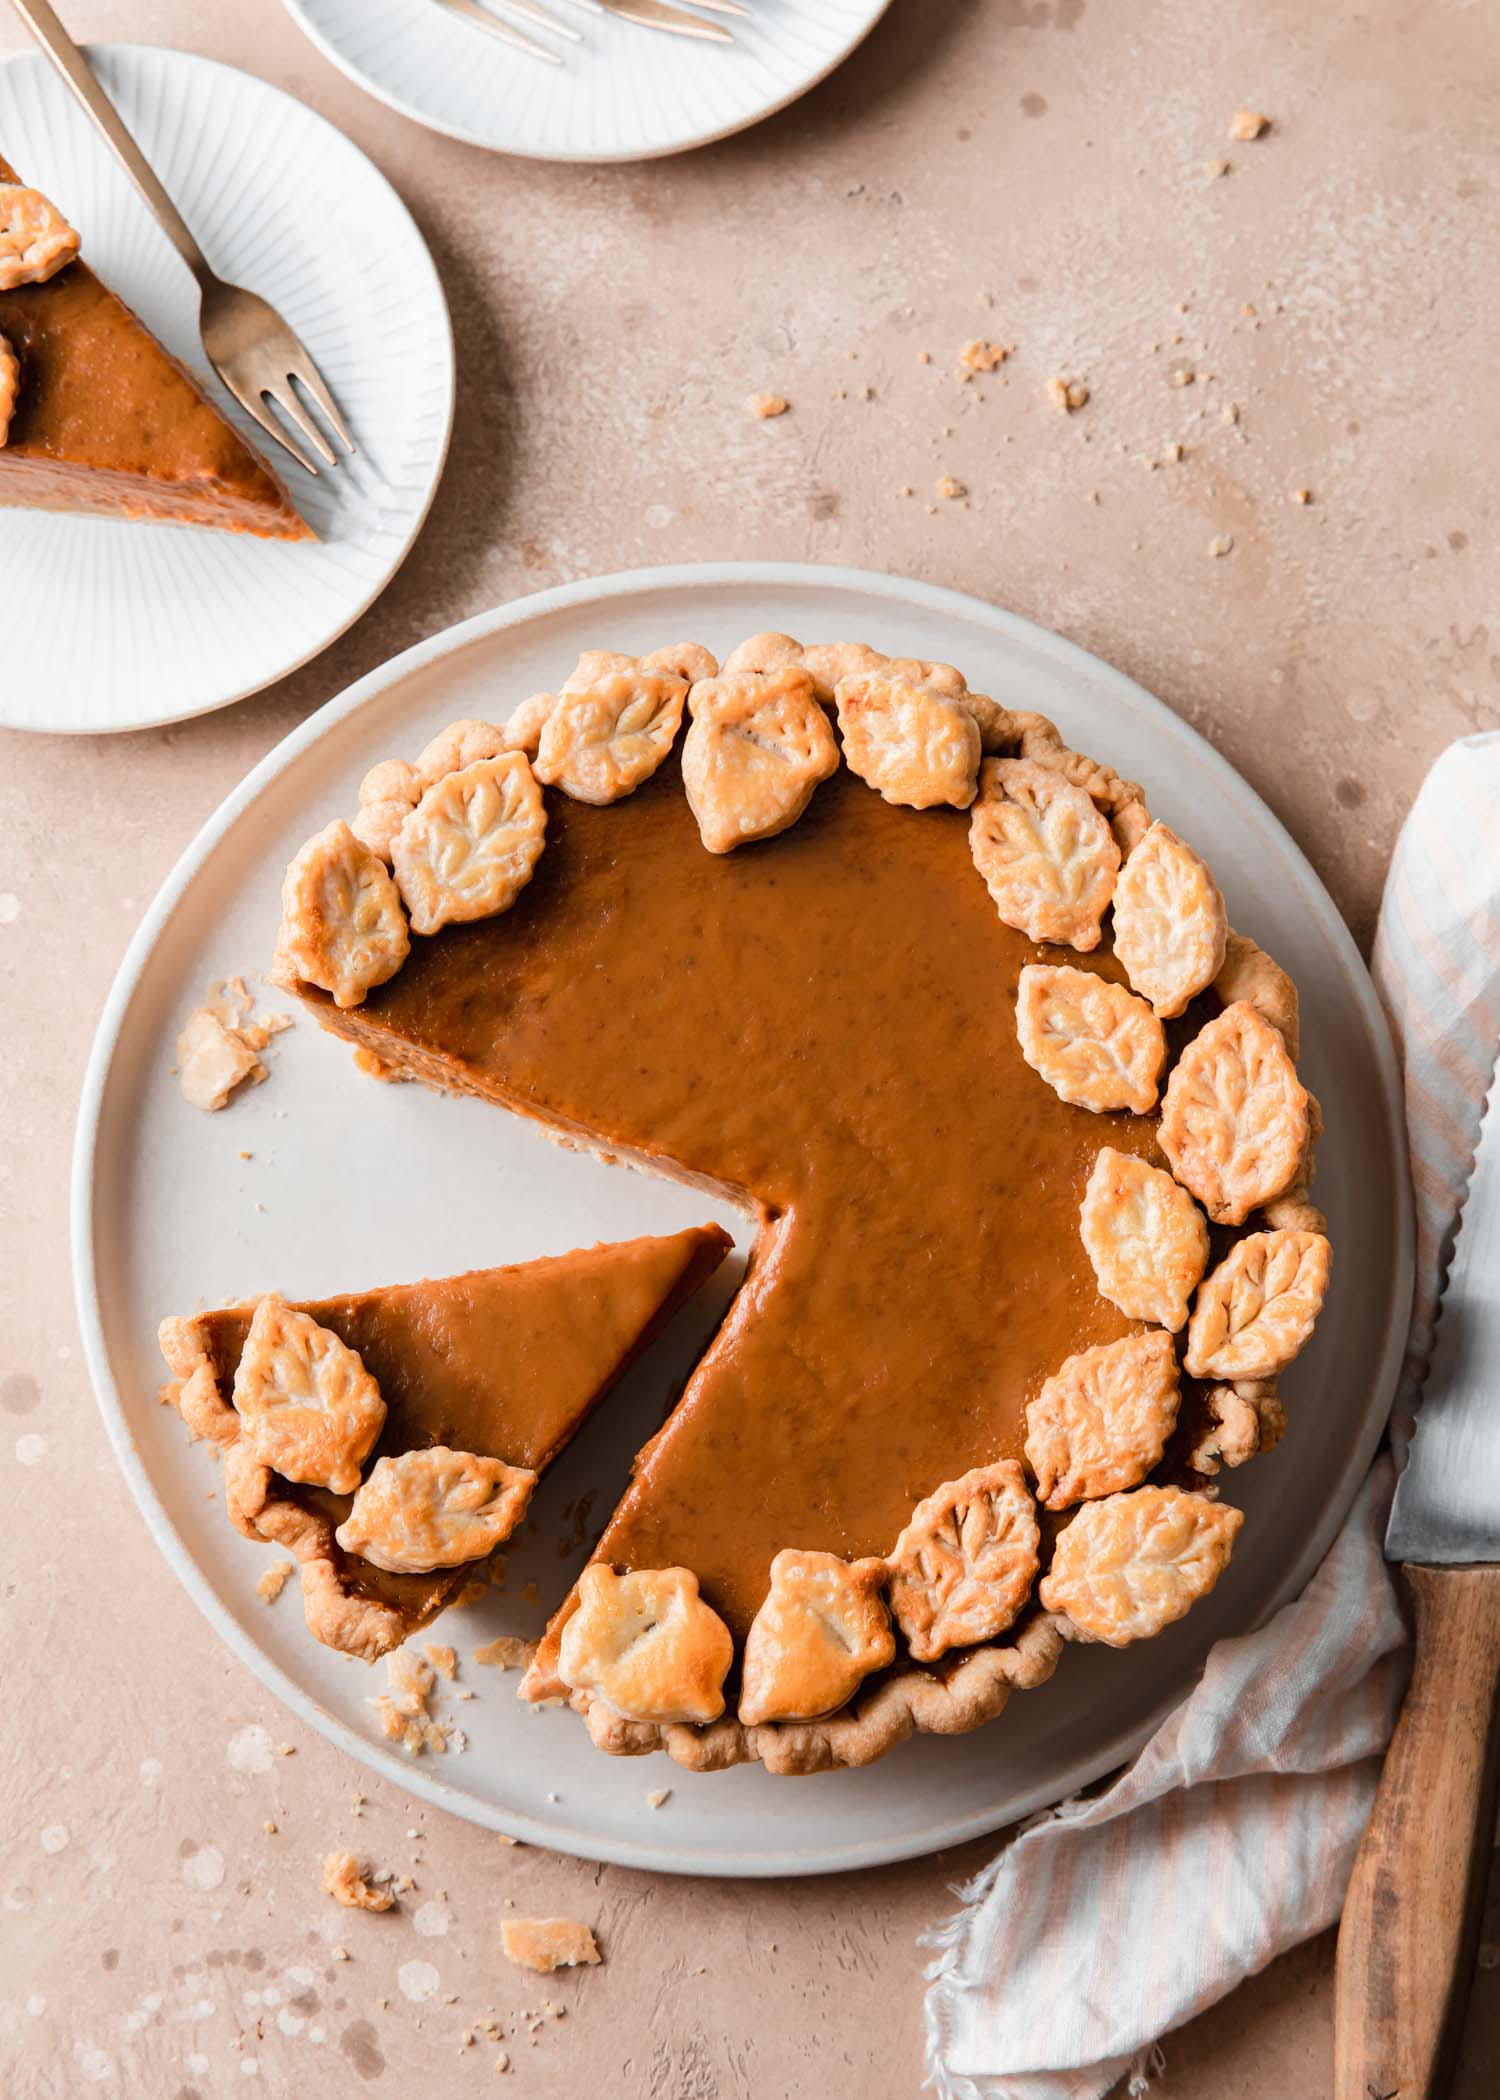 Pumpkin pie with pie dough cut out that decorate around the edge